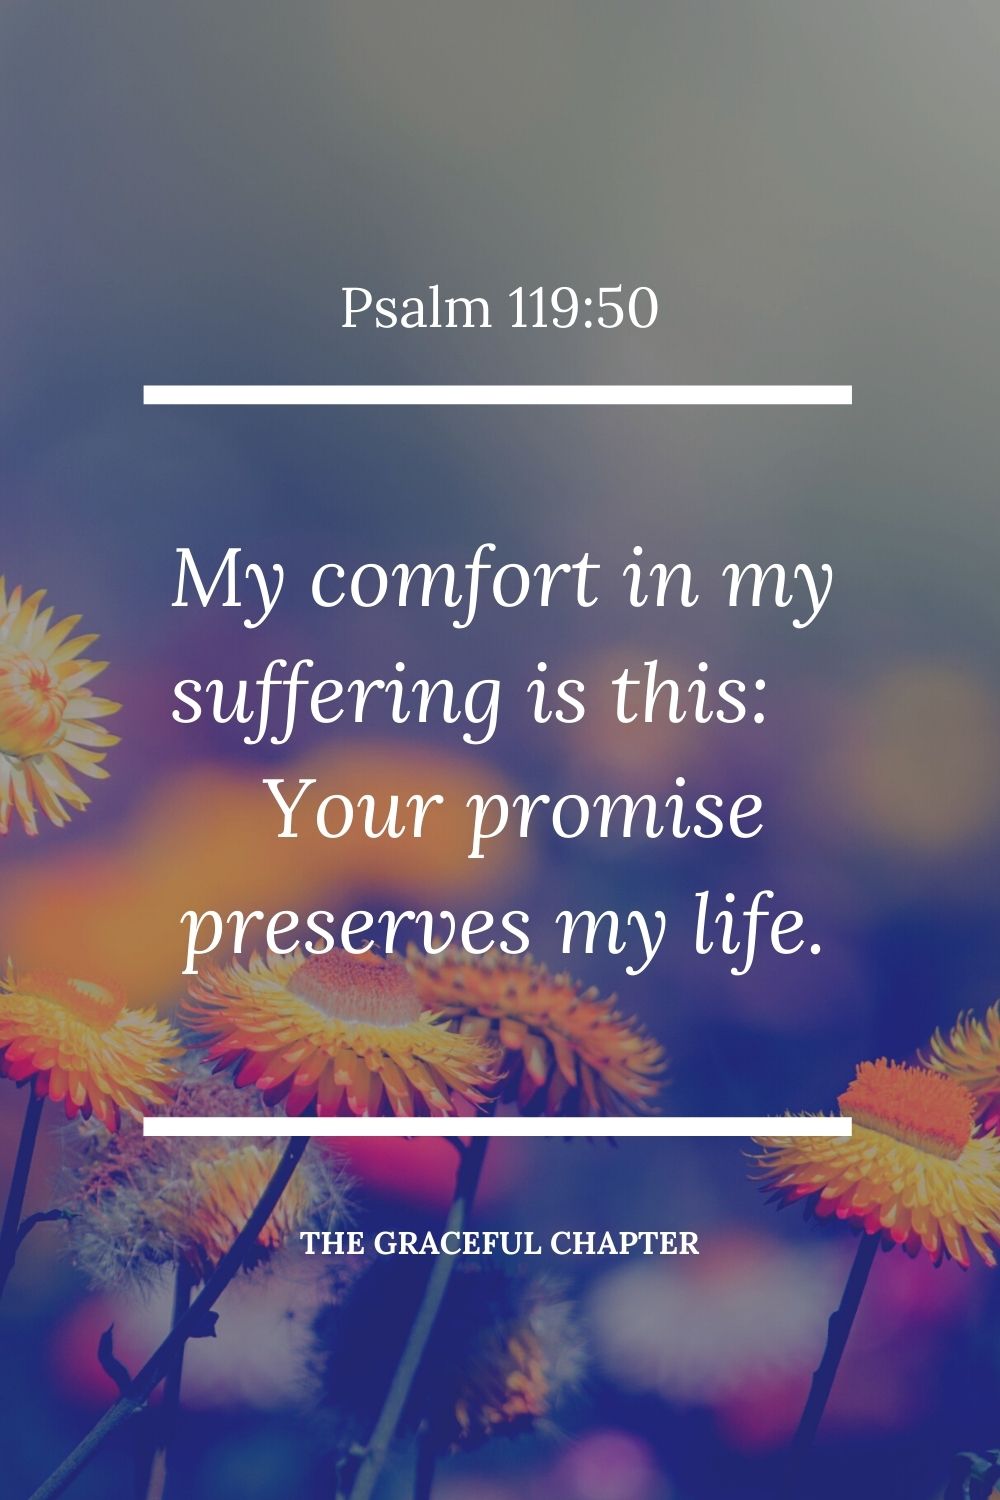 My comfort in my suffering is this: Your promise preserves my life. Psalm 119:50